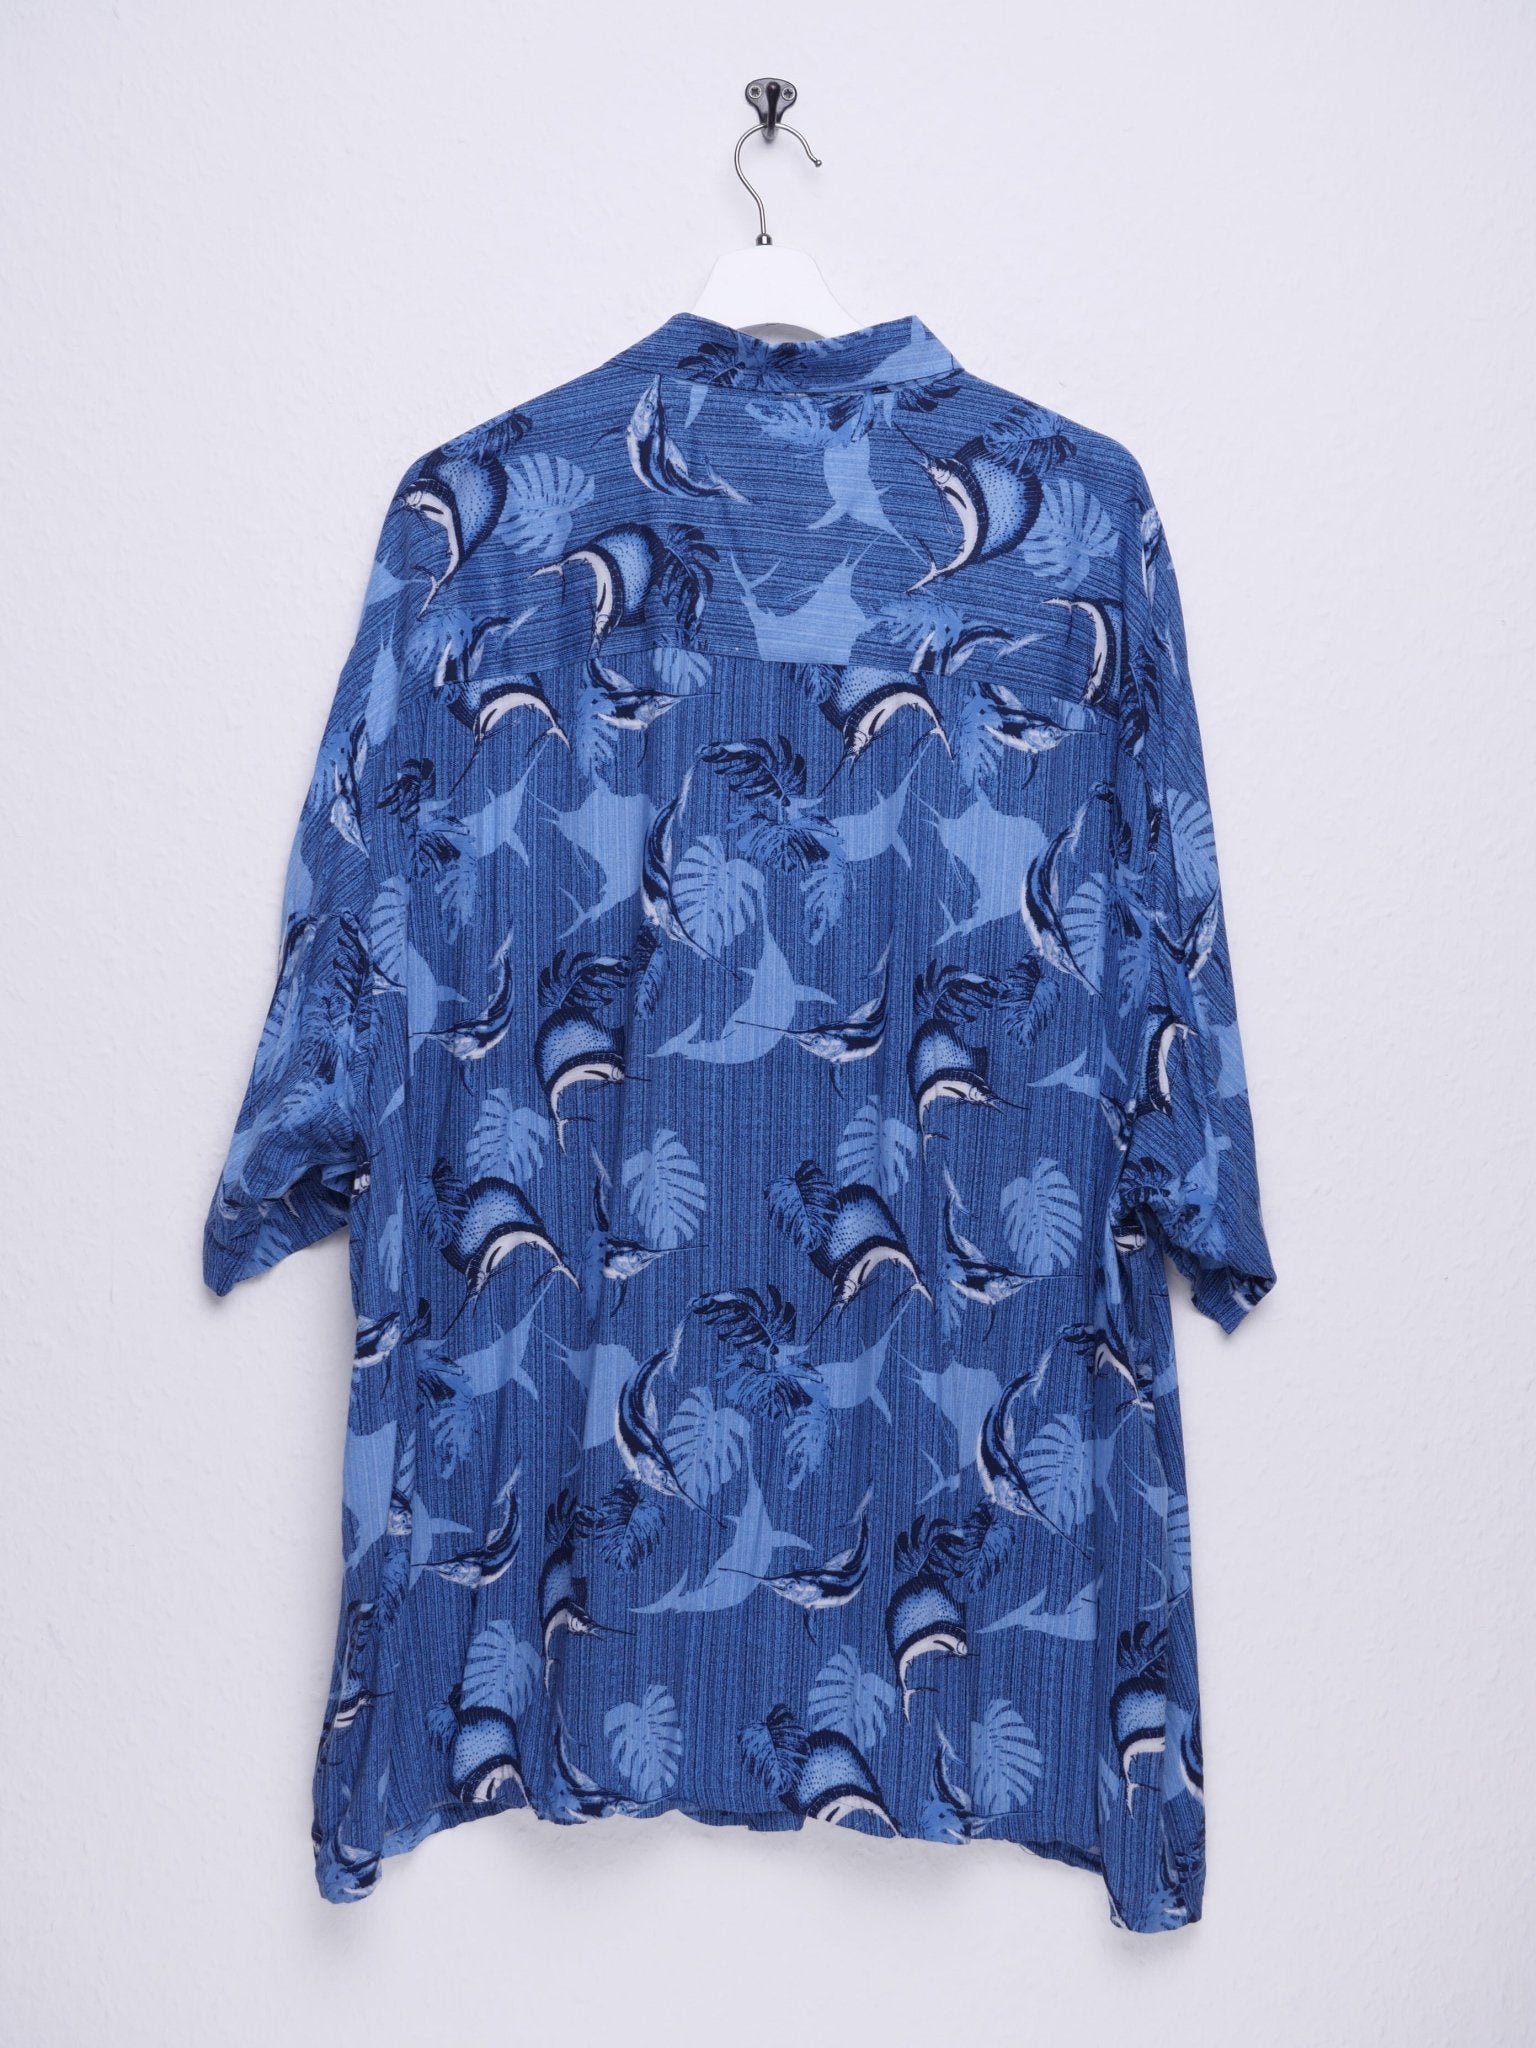 'Tropical Fish' printed Pattern blue S/S Shirt - Peeces